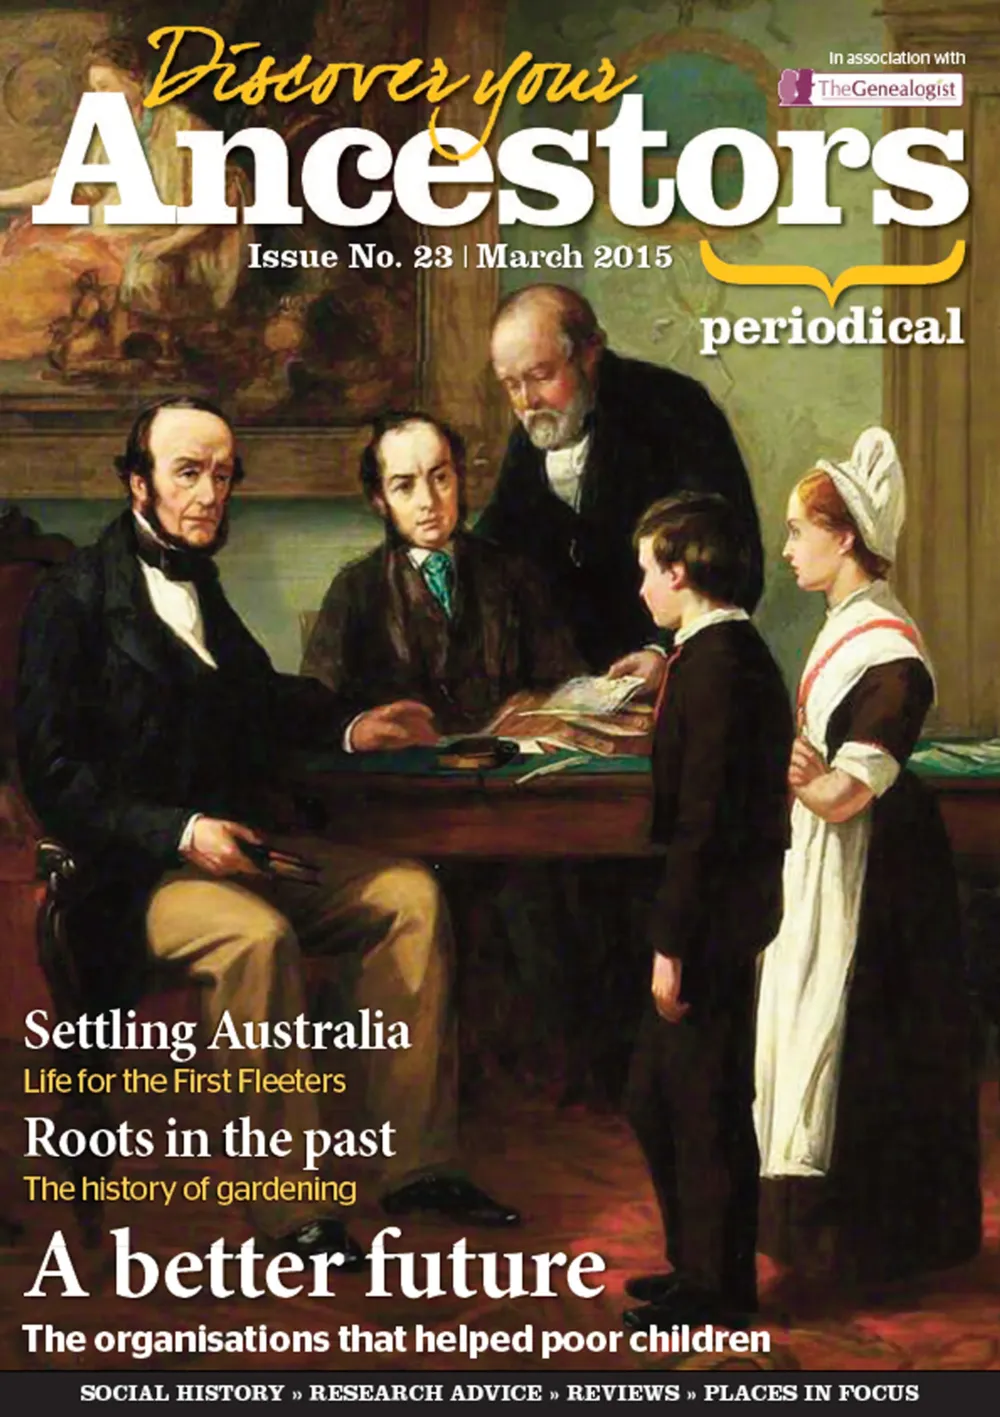 Discover Your Ancestors Periodical - March 2015